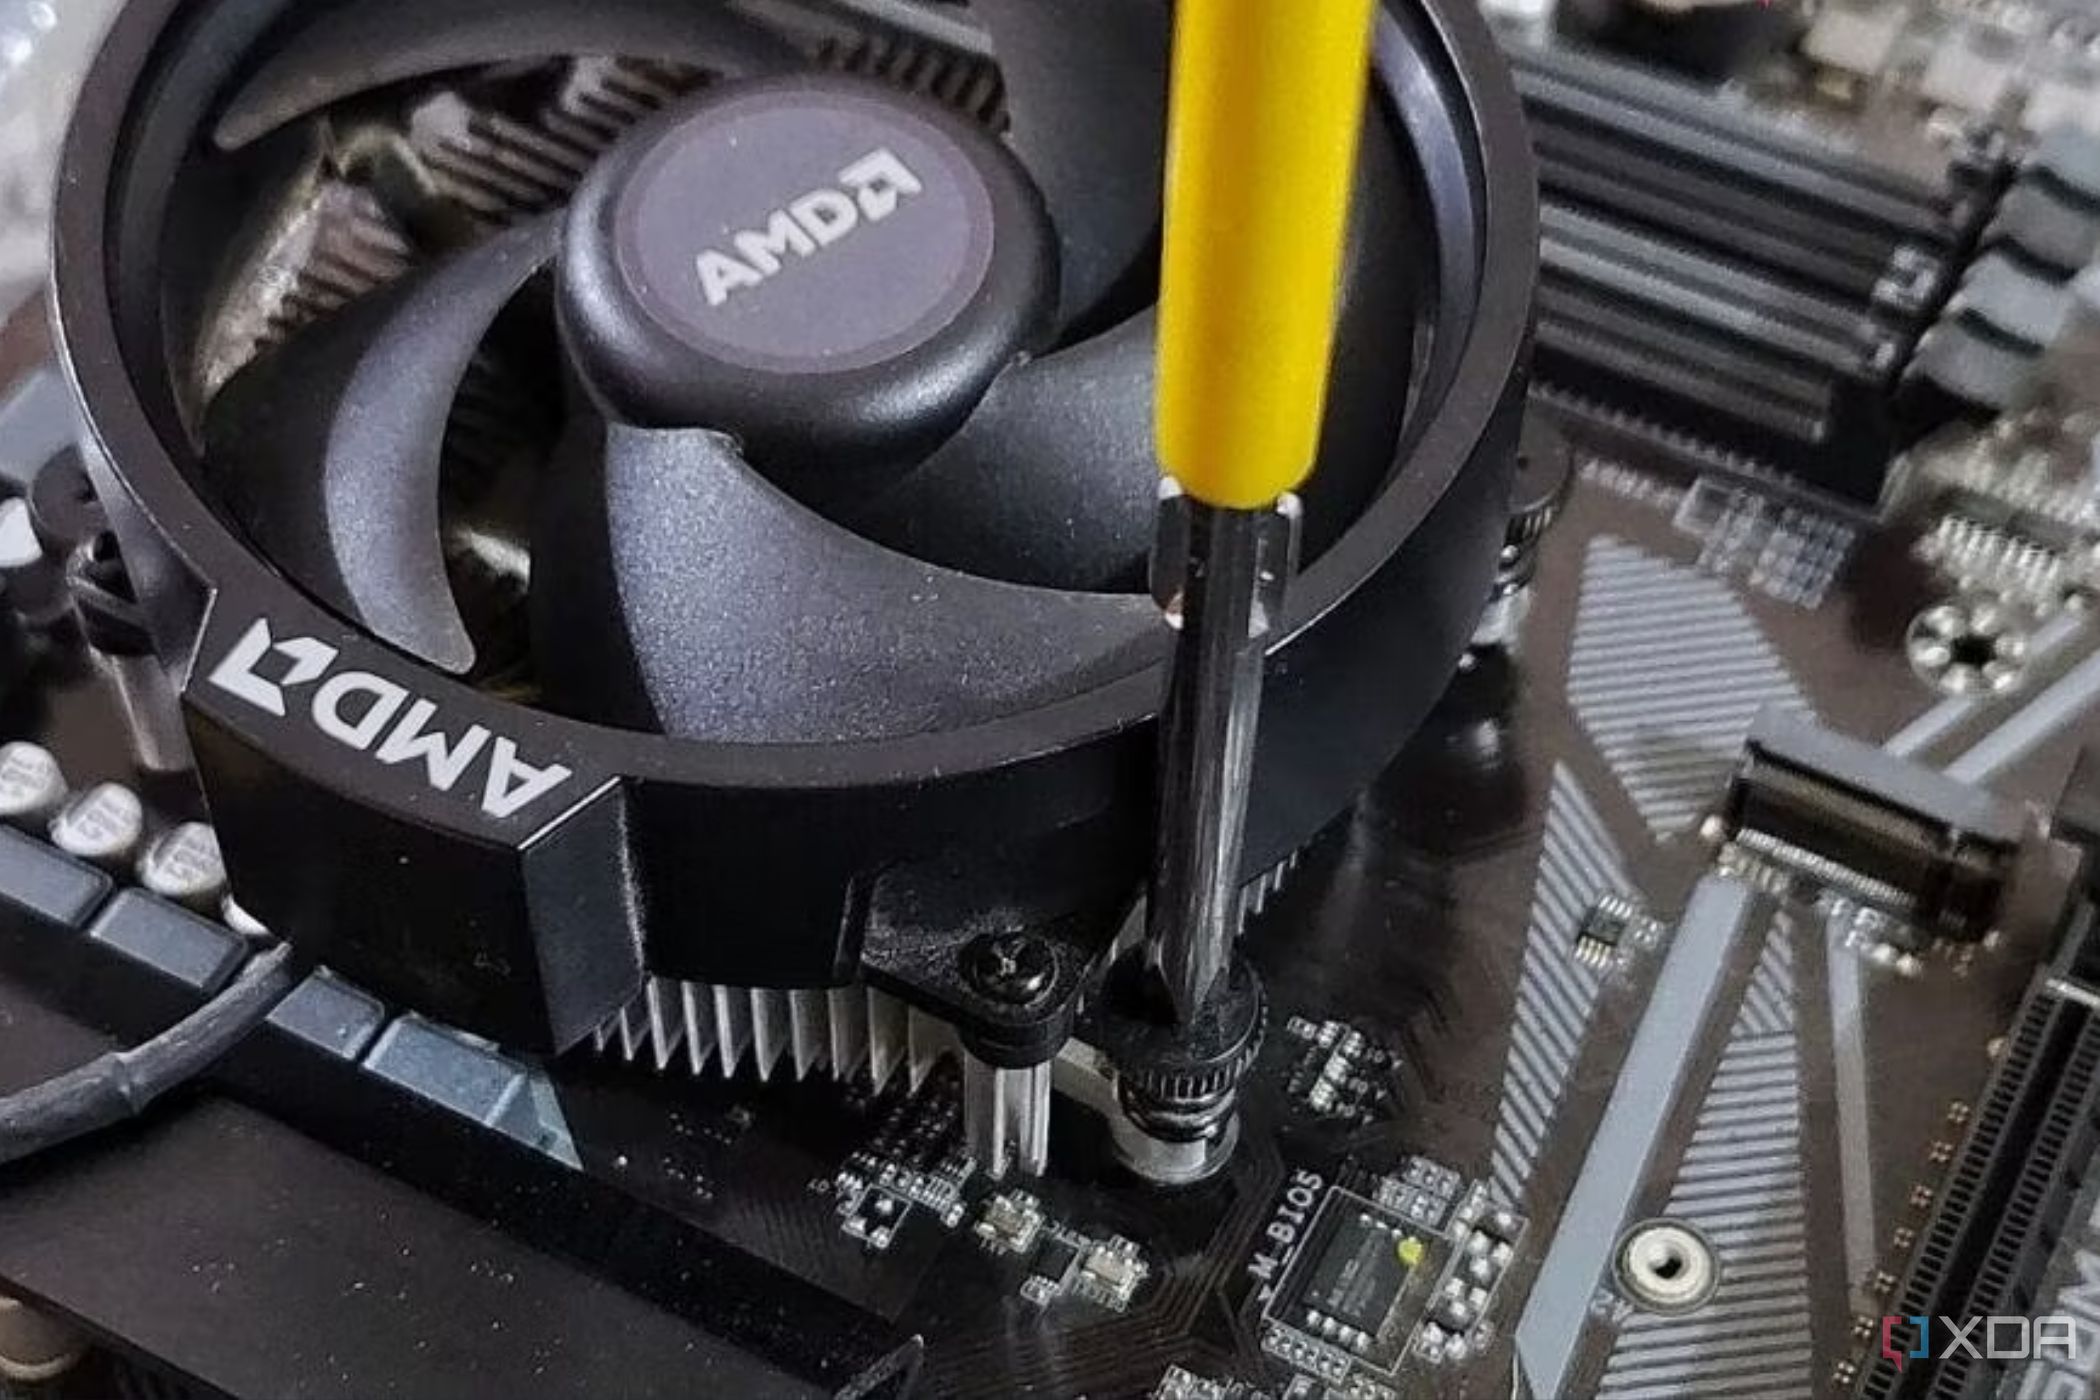 An image showing a stock AMD cooler being screwed to the motherboard using a screwdriver.